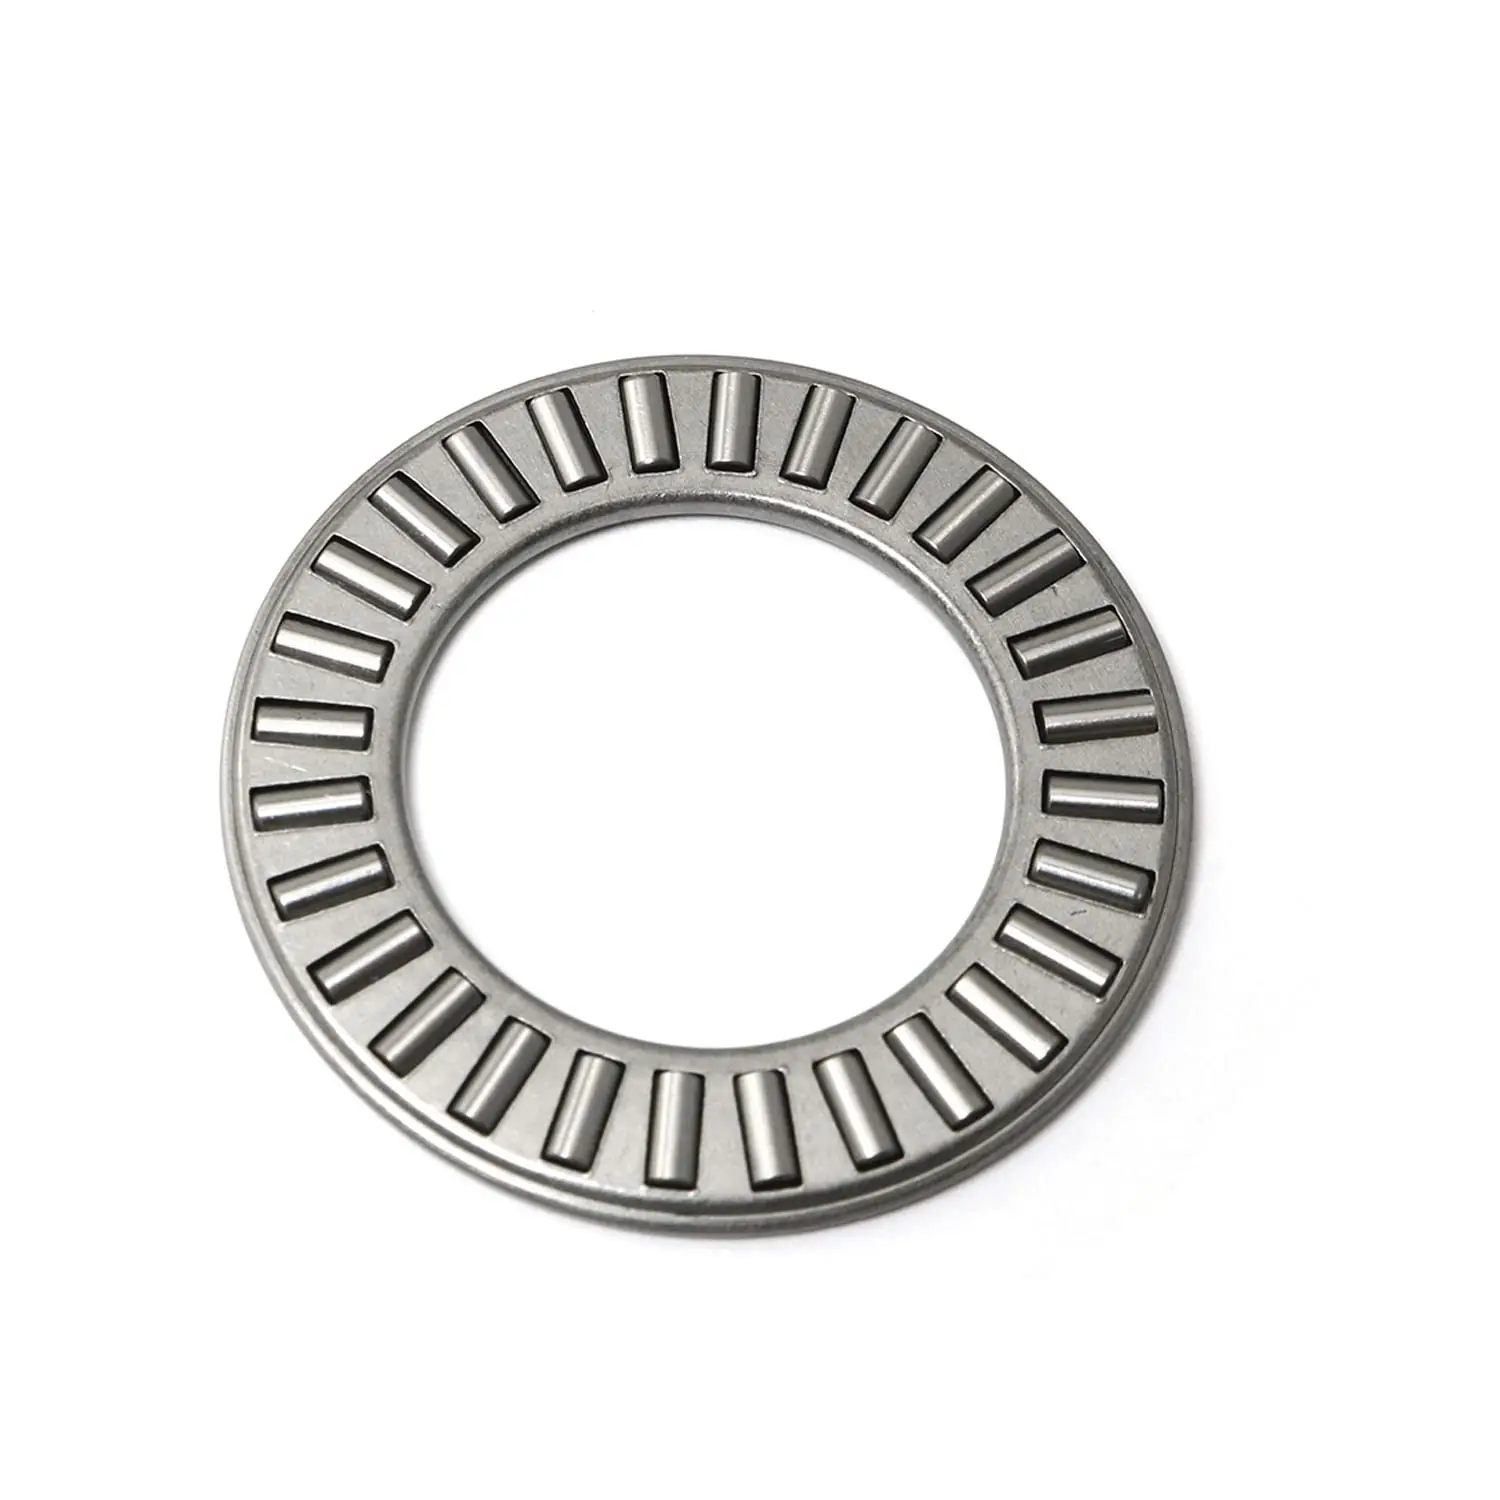 2 PCS NTA815 1/2'' Thrust Needle Roller Bearing With Two Washers 12.7 x 23.8 